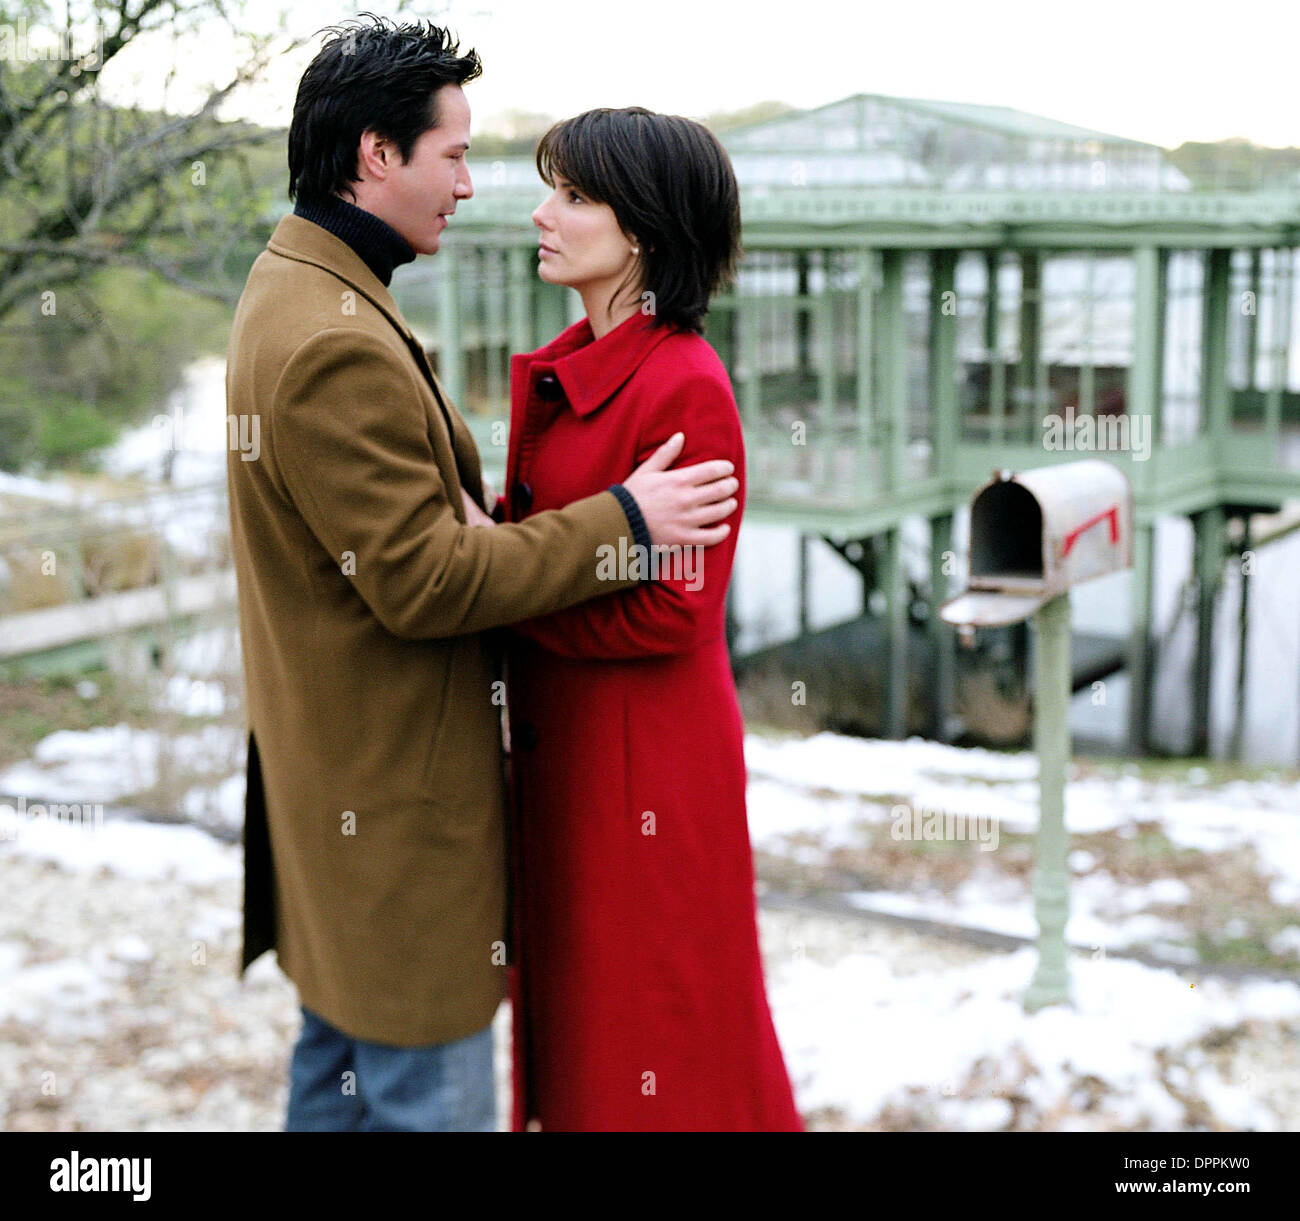 May 22, 2006 KEANU REEVES stars as Alex Wyler and SANDRA BULLOCK stars as Kate Forster in Warner Bros. Pictures' and Village Roadshow romantic drama ''The Lake House.''. .K49221ES.TV-FILM STILL.